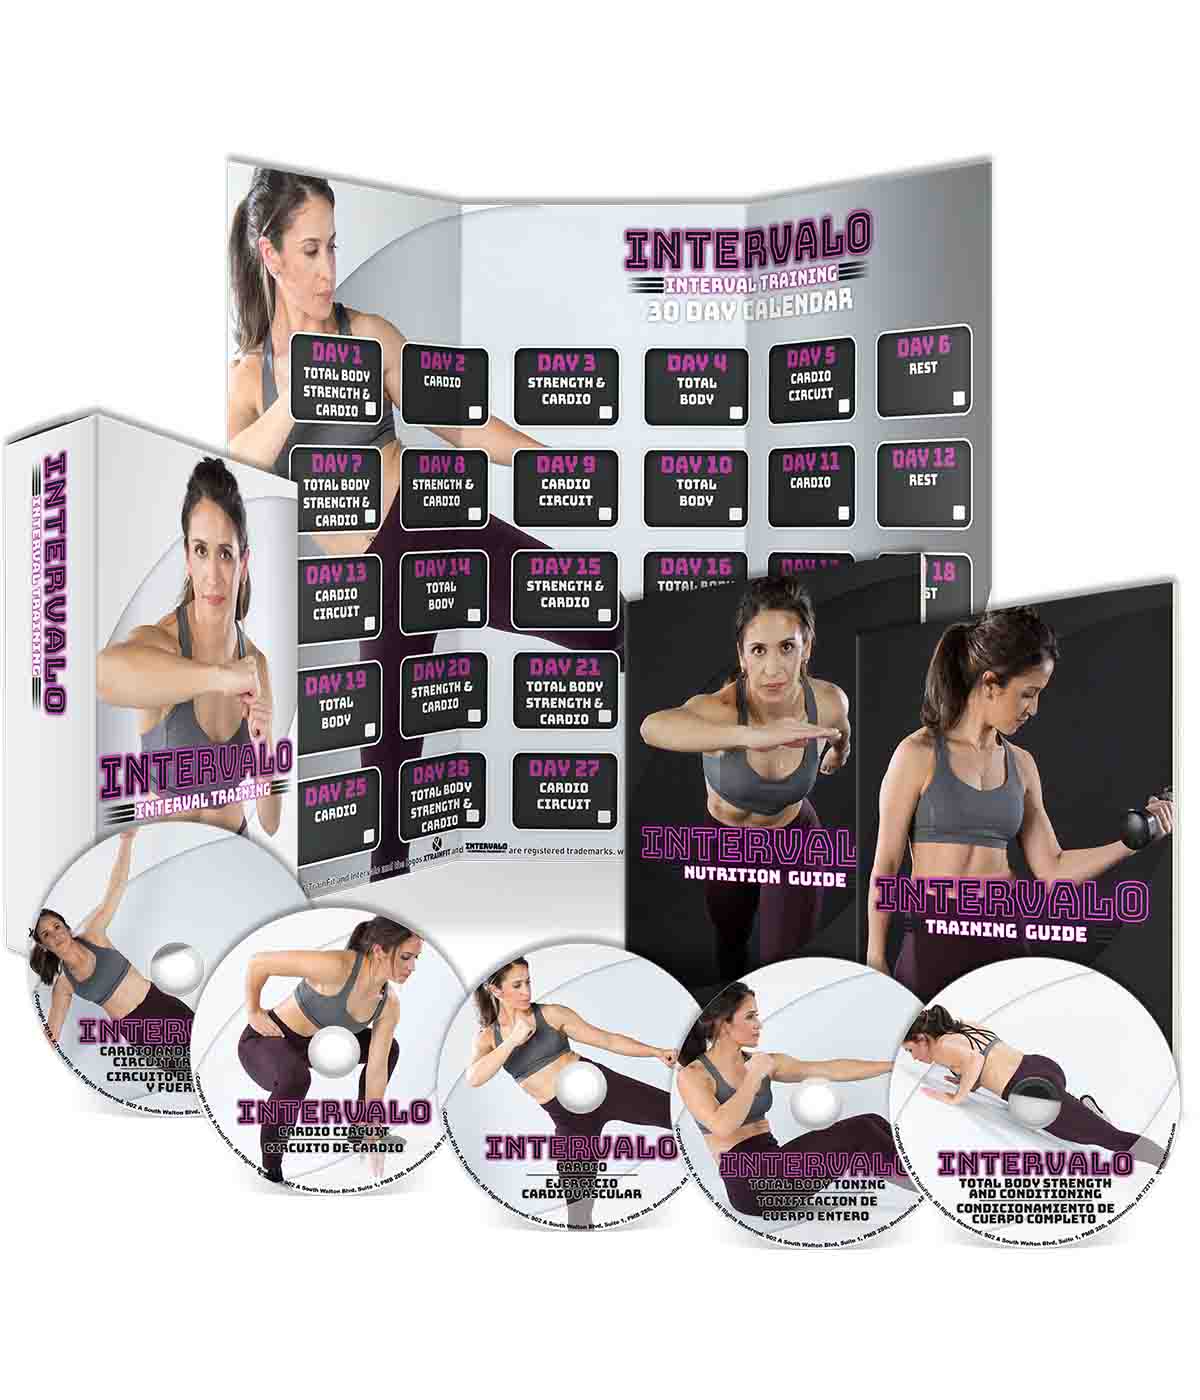 XTRAINFIT AT HOME WORKOUT PROGRAMS ON DVD 90 DAYS WITH TRAINING CALENDARS AND NUTRITION PLANS